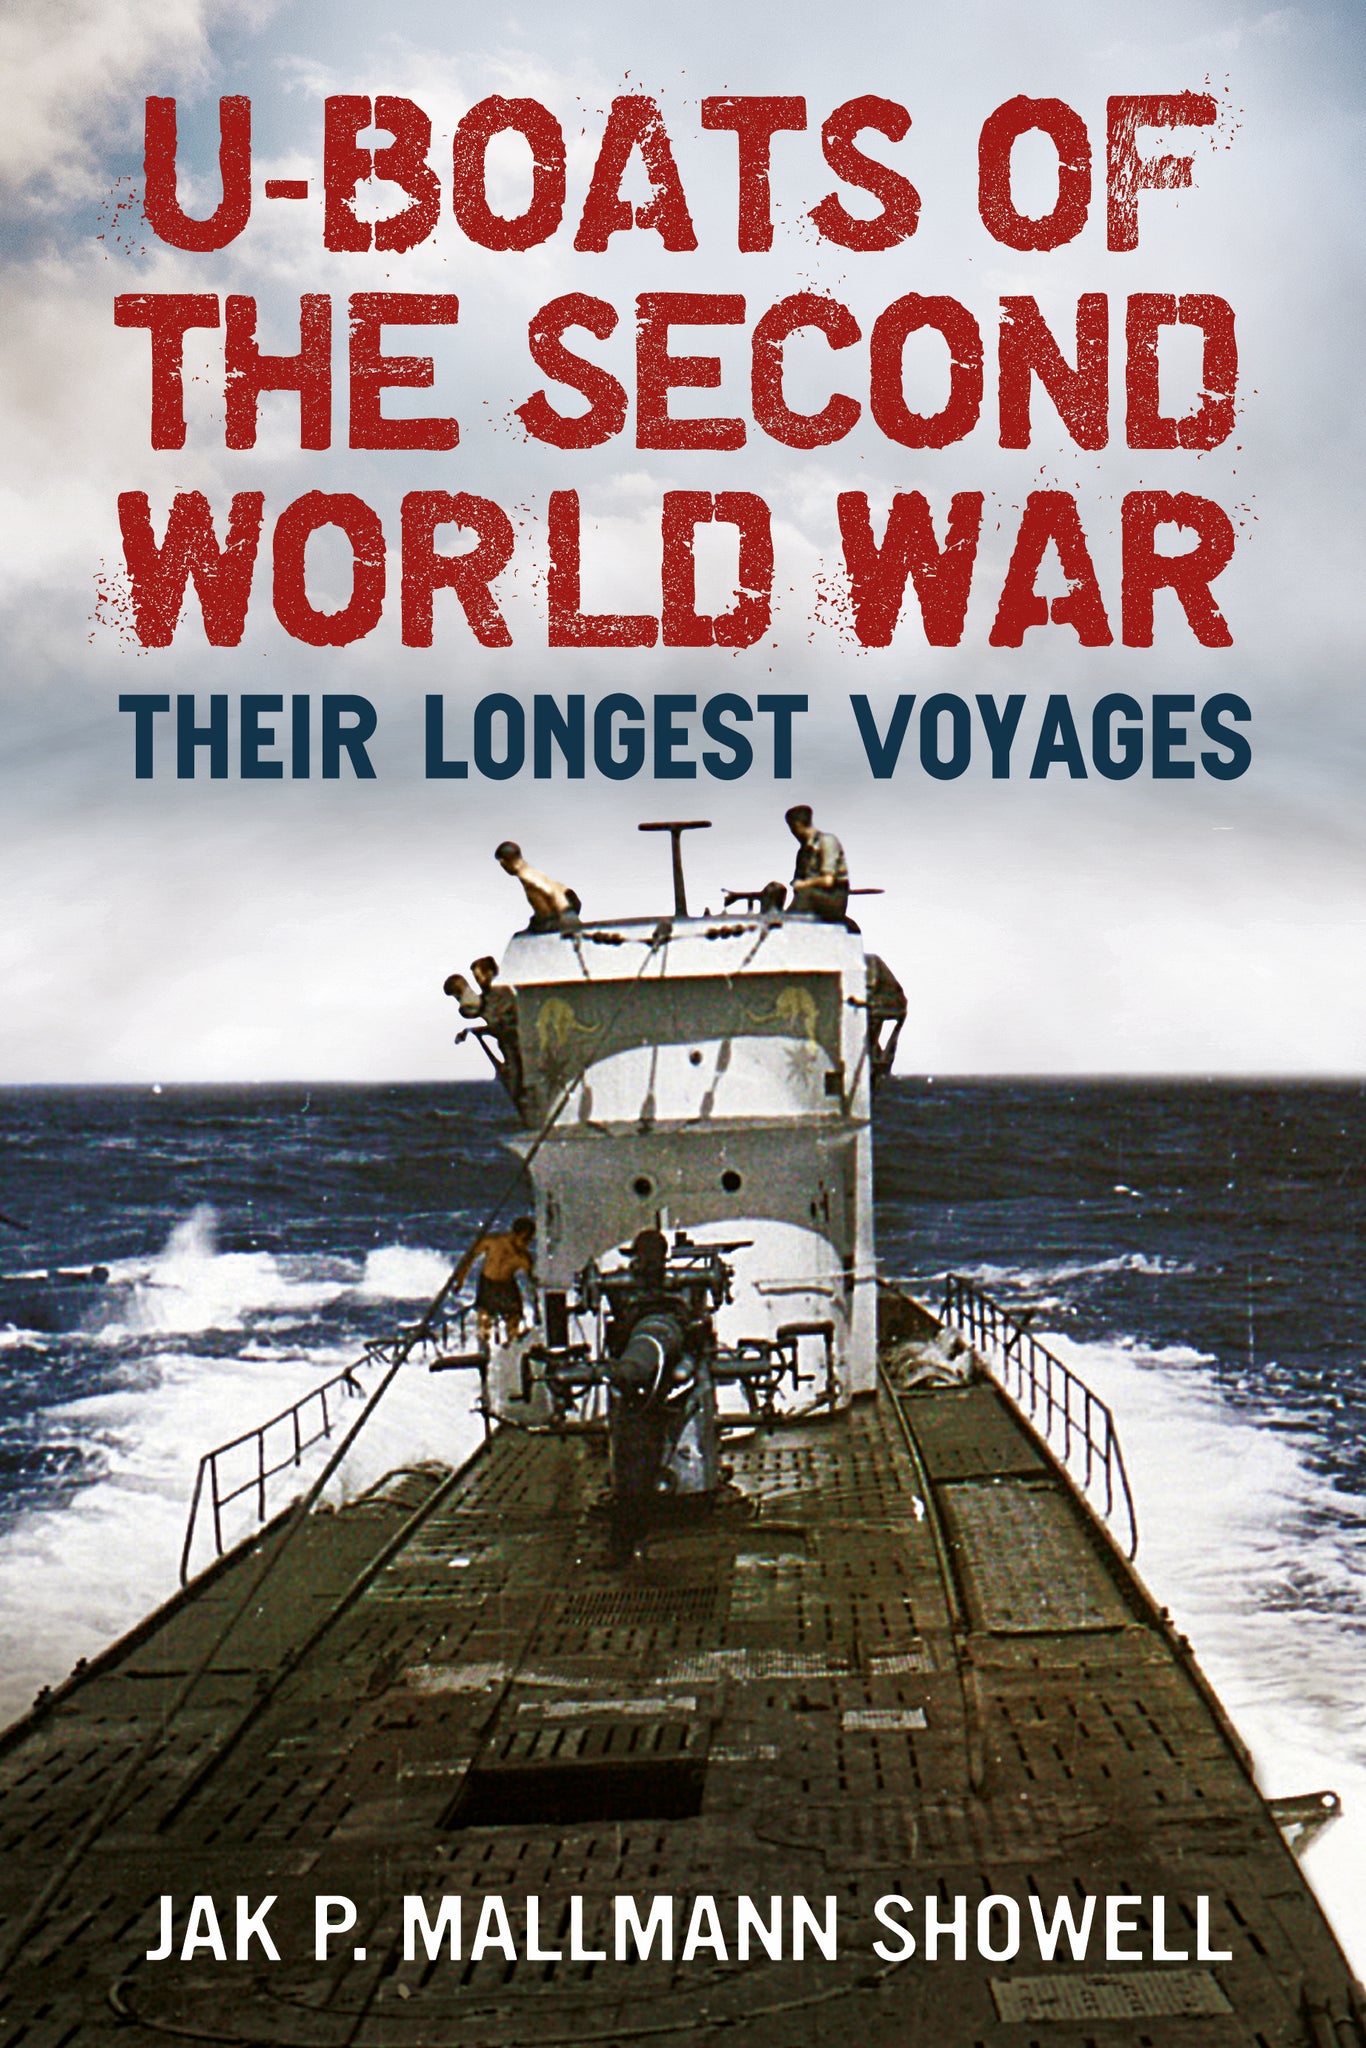 U-boats of the Second World War: Their Longest Voyages (paperback edition)